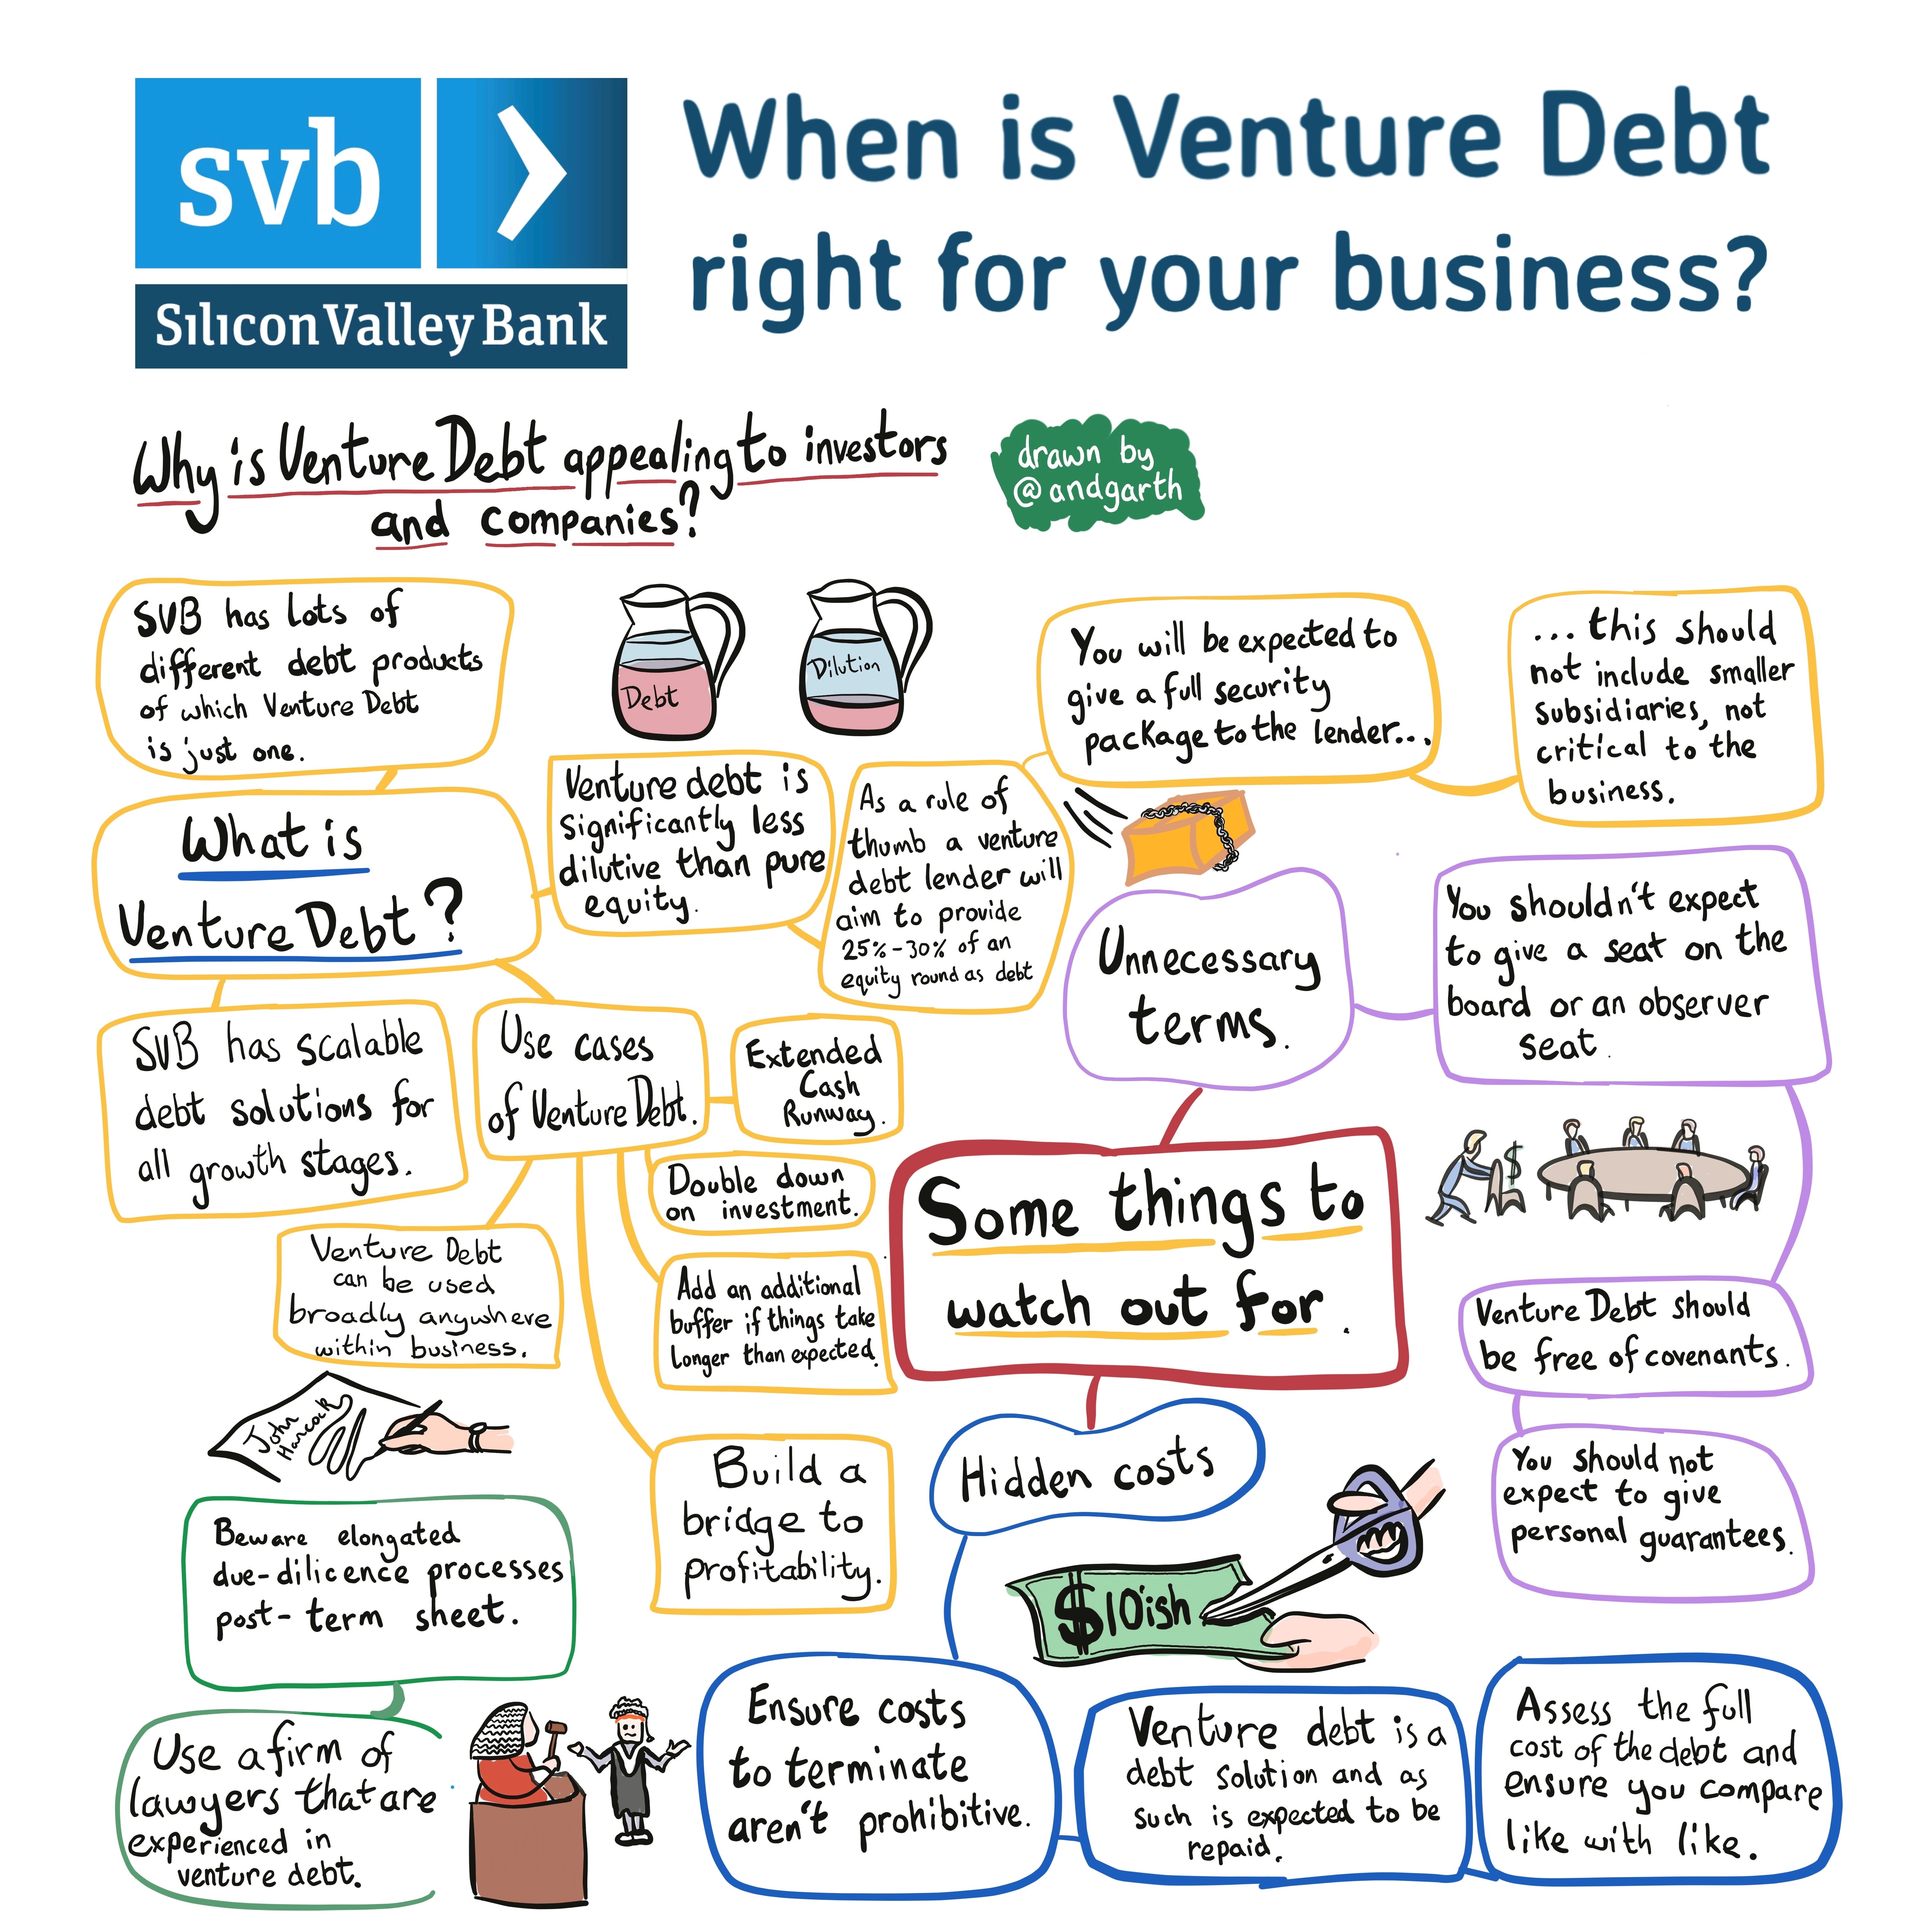 Who is eligible for venture debt?